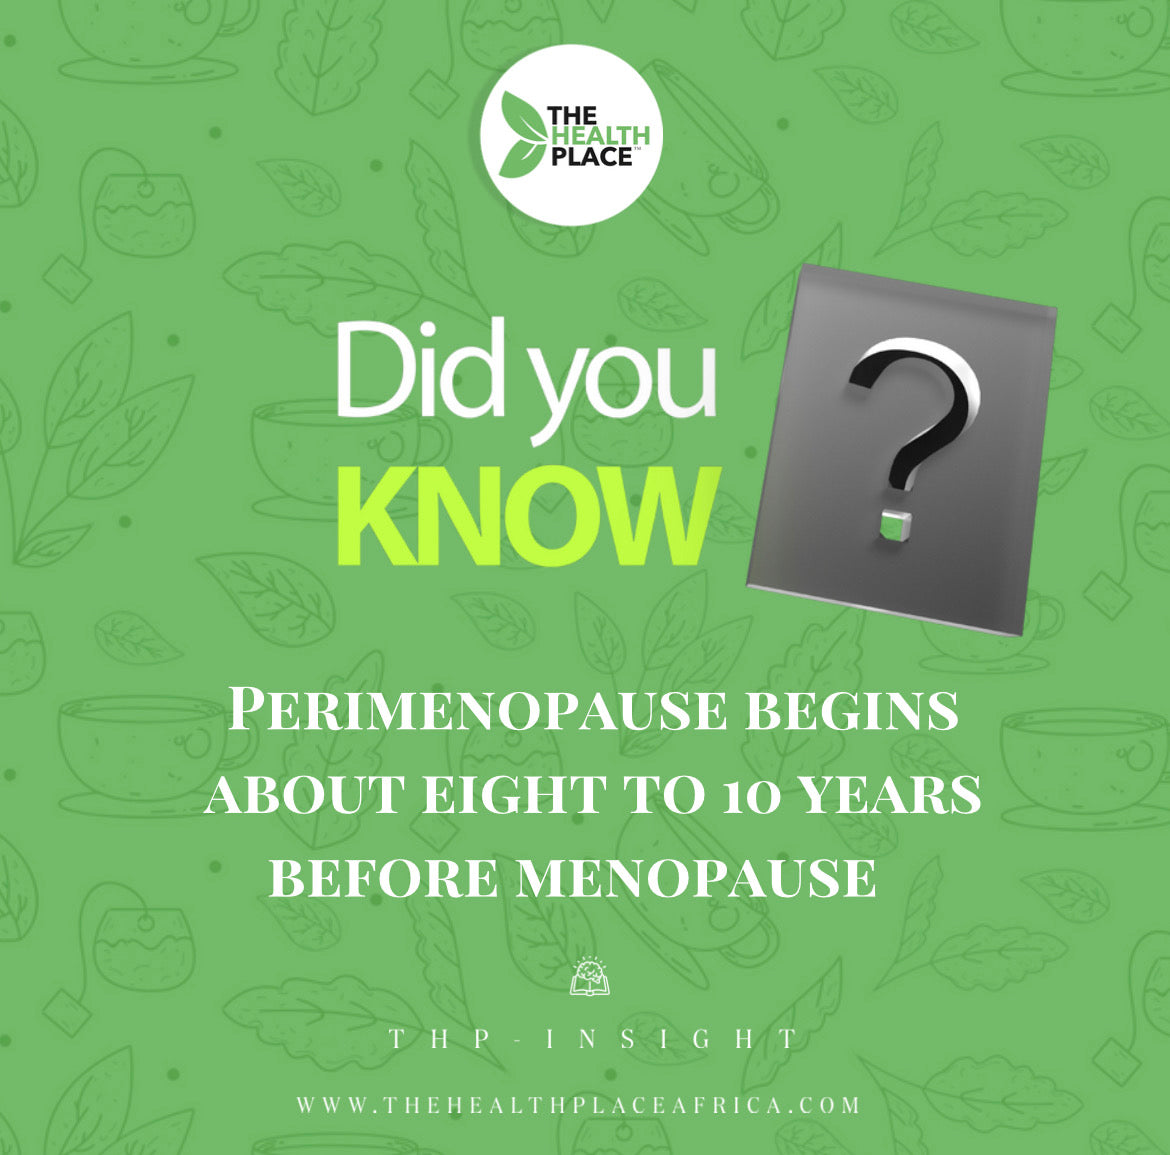 DID YOU KNOW- PERIMENOPAUSE BEGINS ABOUT 8-10 YEARS BEFORE MENOPAUSE